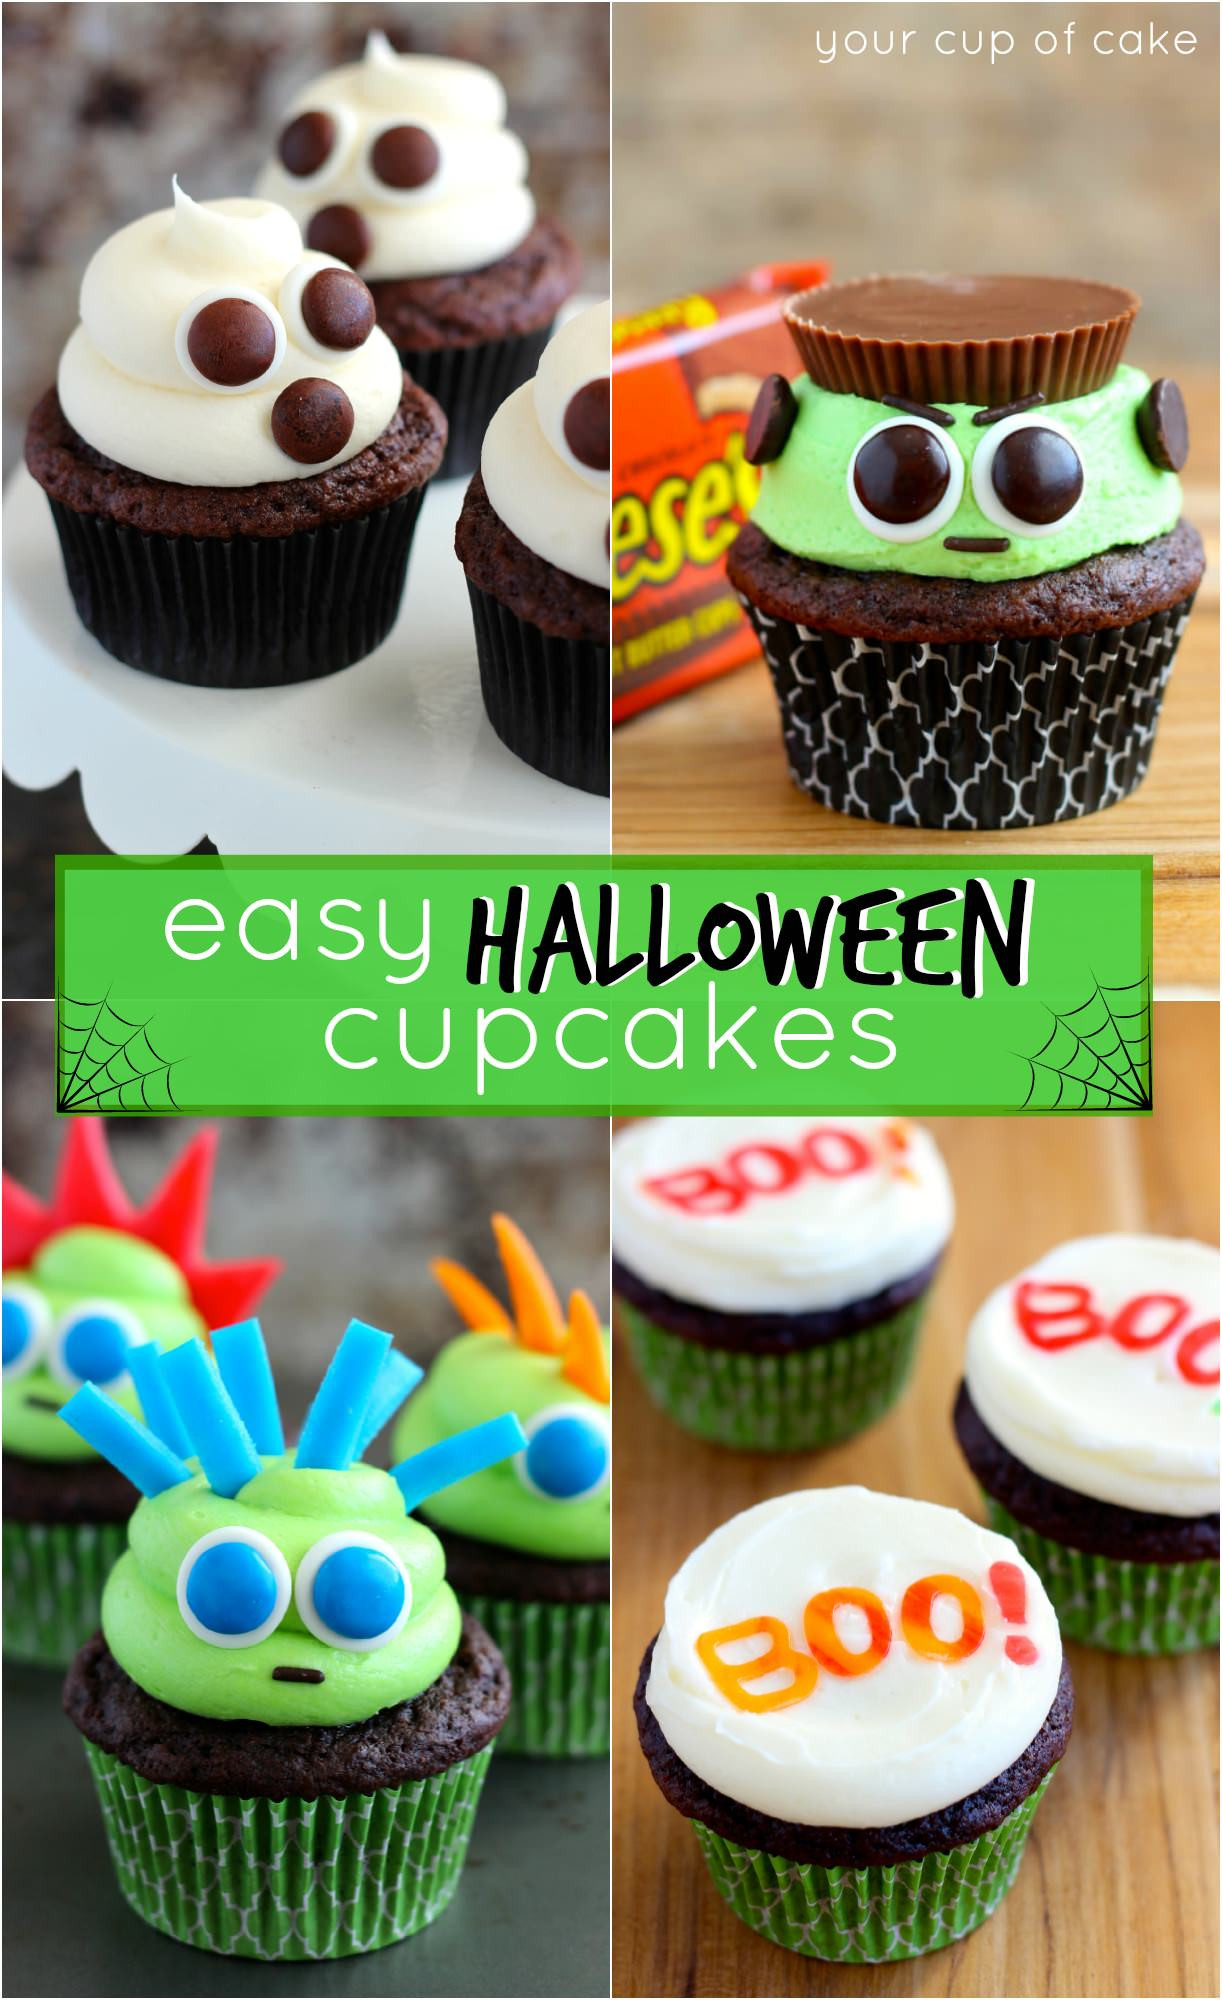 Easy Halloween Cupcakes Decorations
 Easy Halloween Cupcake Ideas Your Cup of Cake